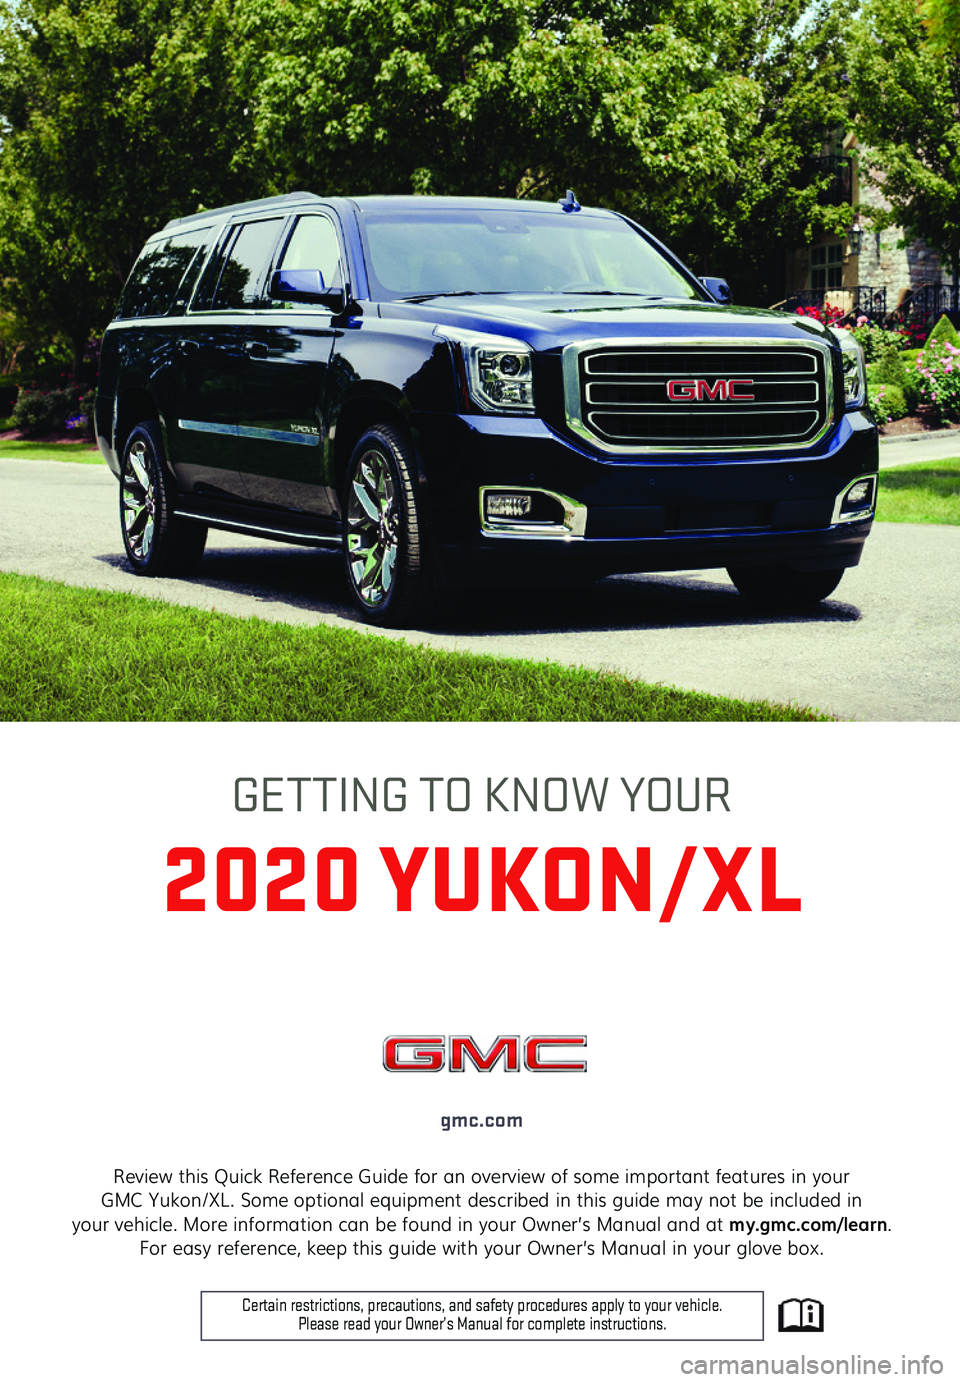 GMC YUKON 2020  Get To Know Guide 1
Review this Quick Reference Guide for an overview of some important features in your  GMC Yukon/XL. Some optional equipment described in this guide may not be included in  your vehicle. More informa